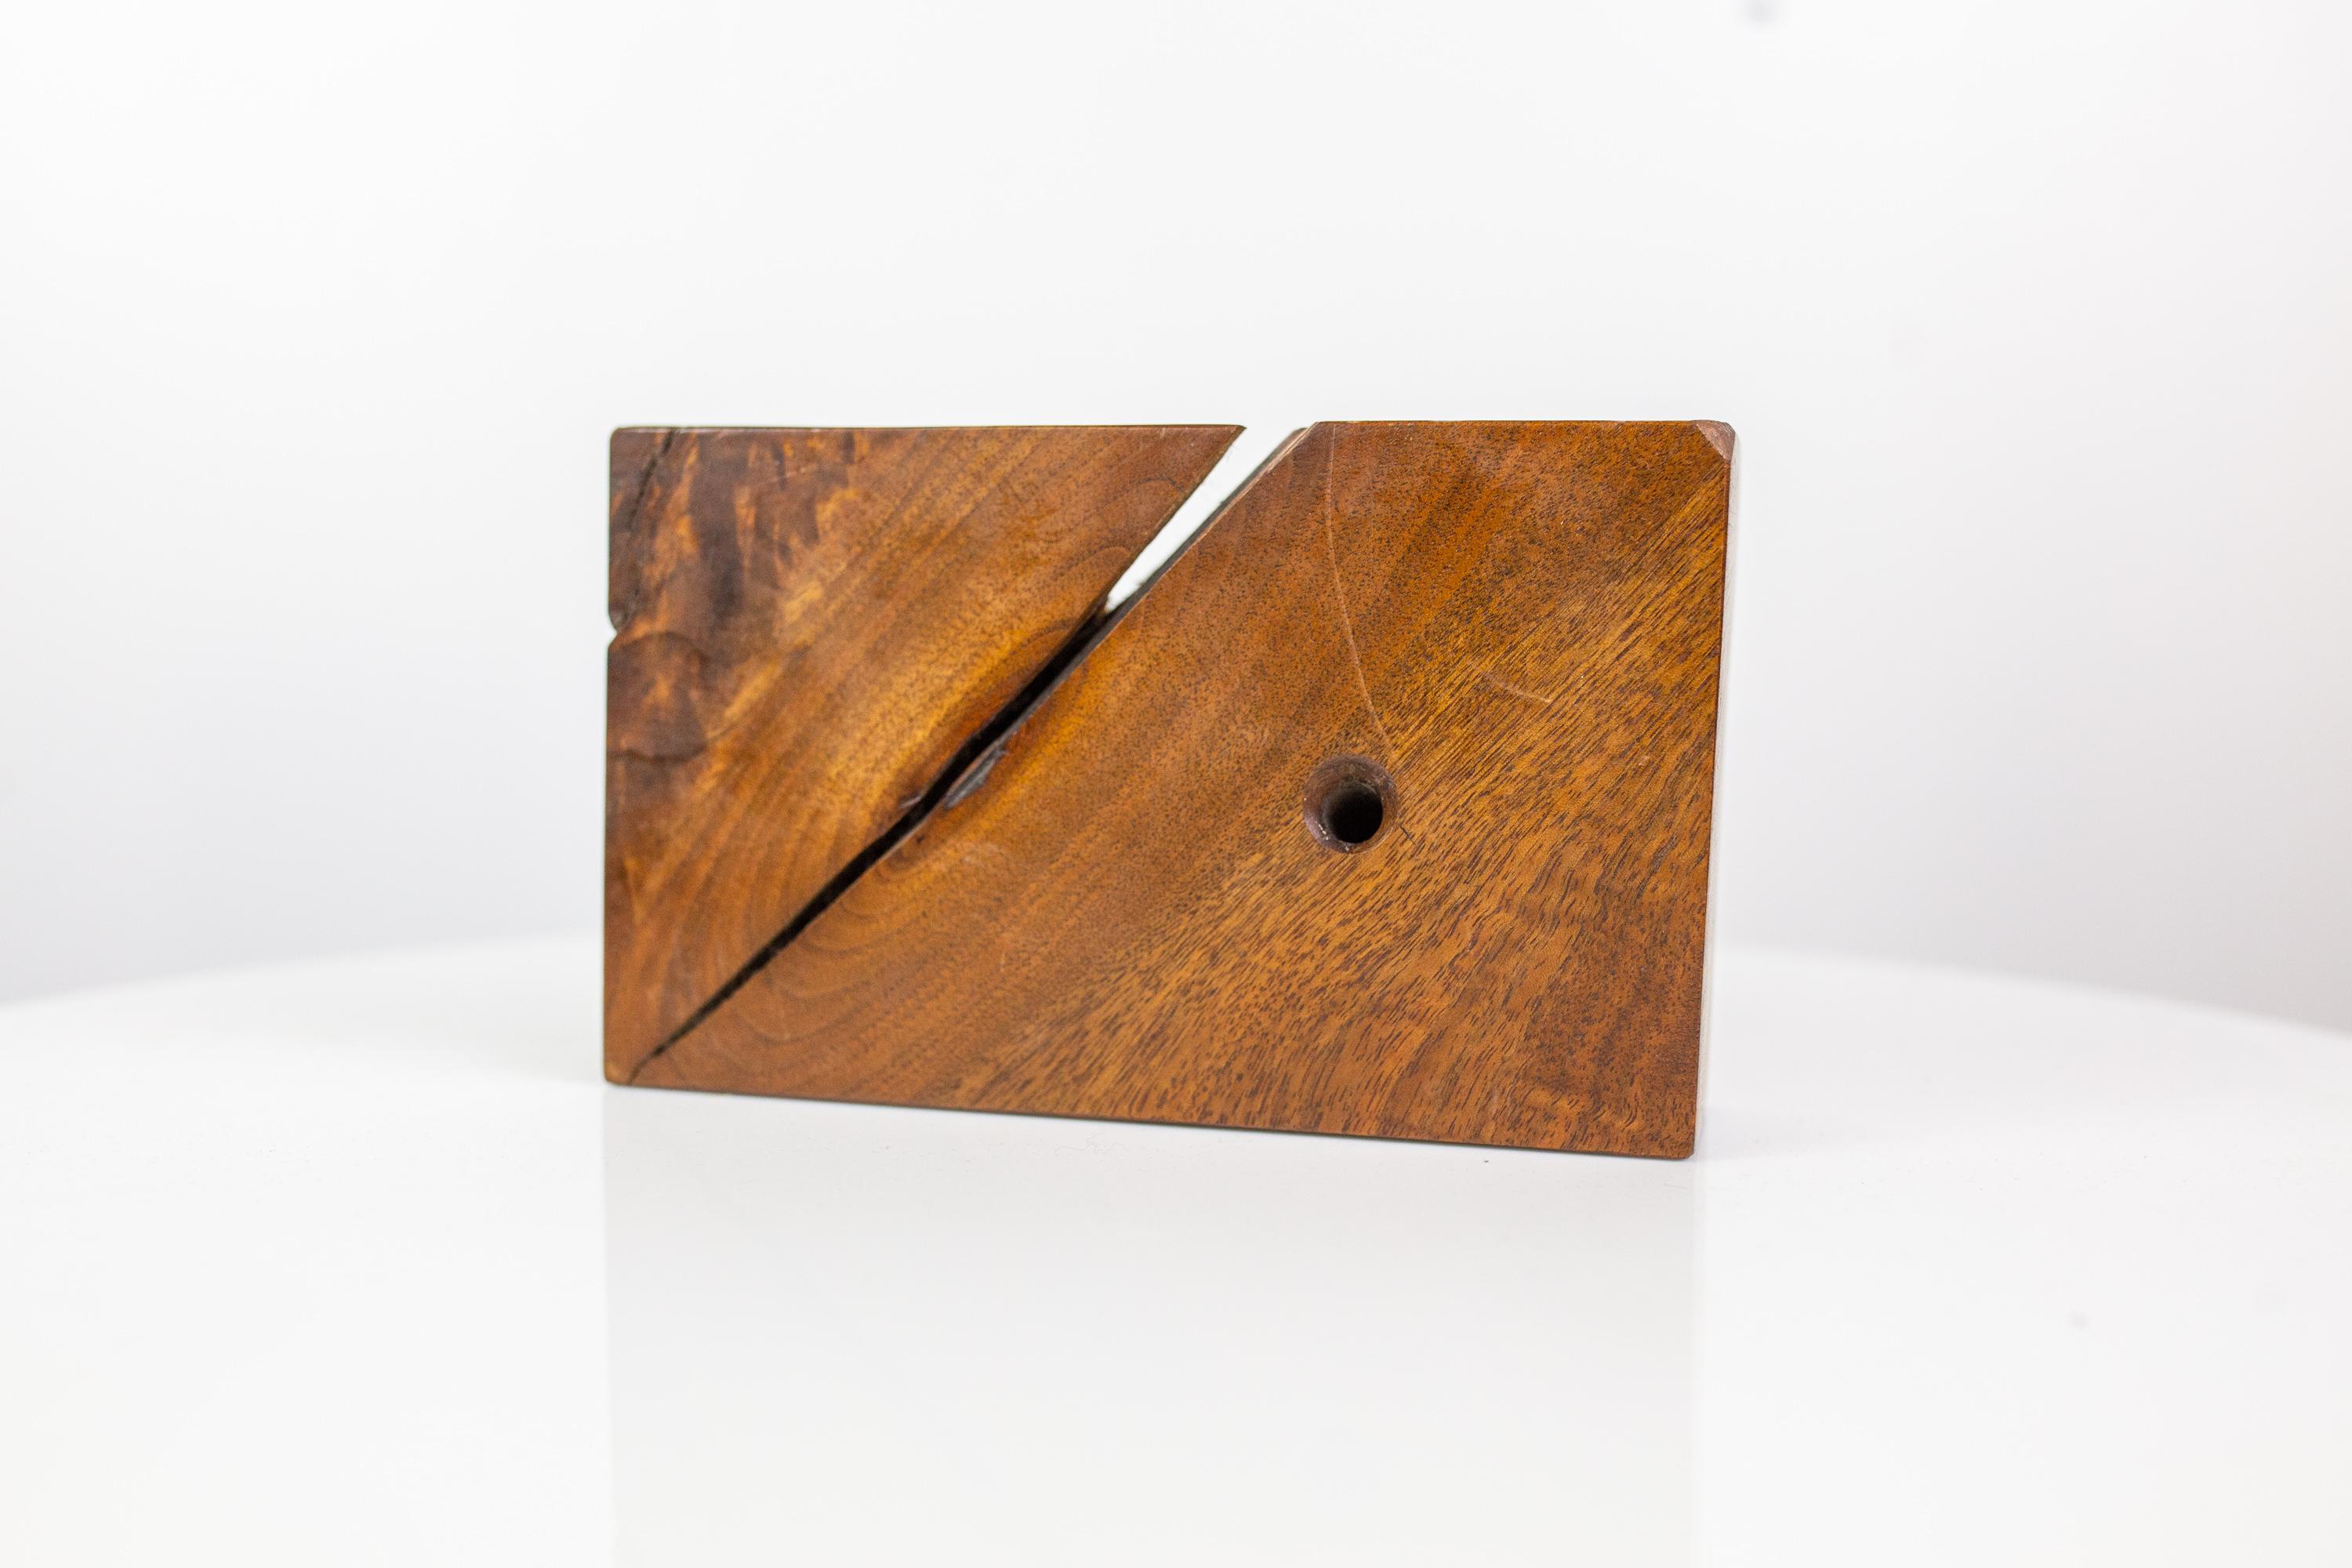 Pen holder by Mira Nakashima (the daughter of George Nakashima) dated 2001.
Rare and collectable desk accessories. Handcrafted of wood and signed.